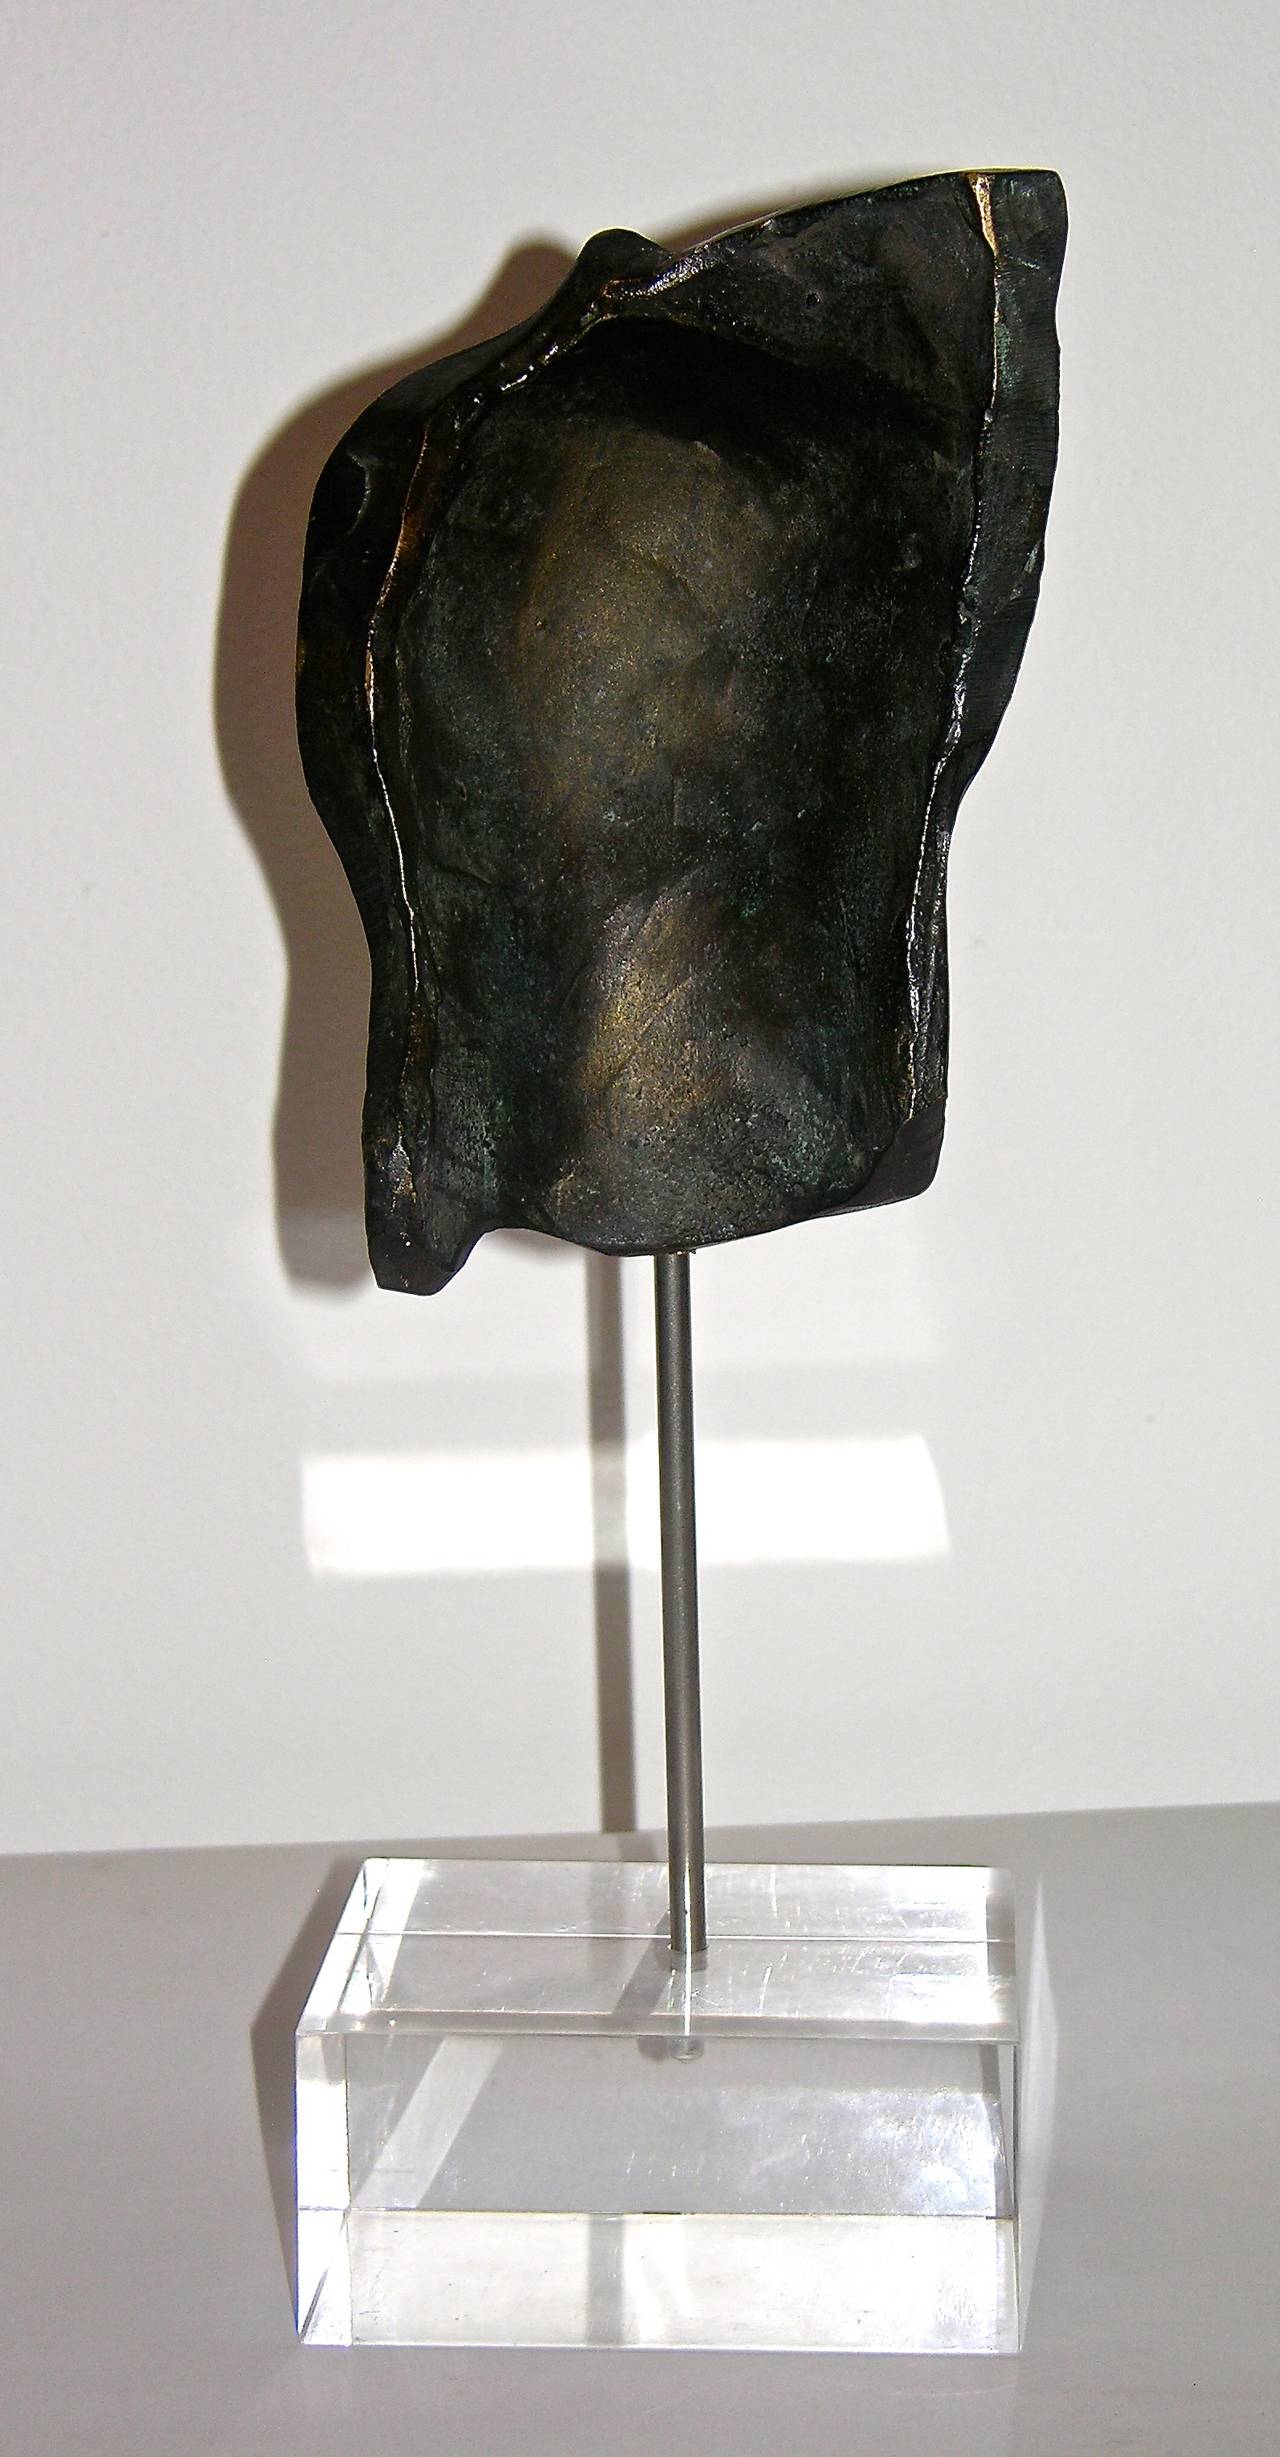 Modern Hollow Face, Italian Black Bronze Sculpture on Lucite Base by Ginestroni